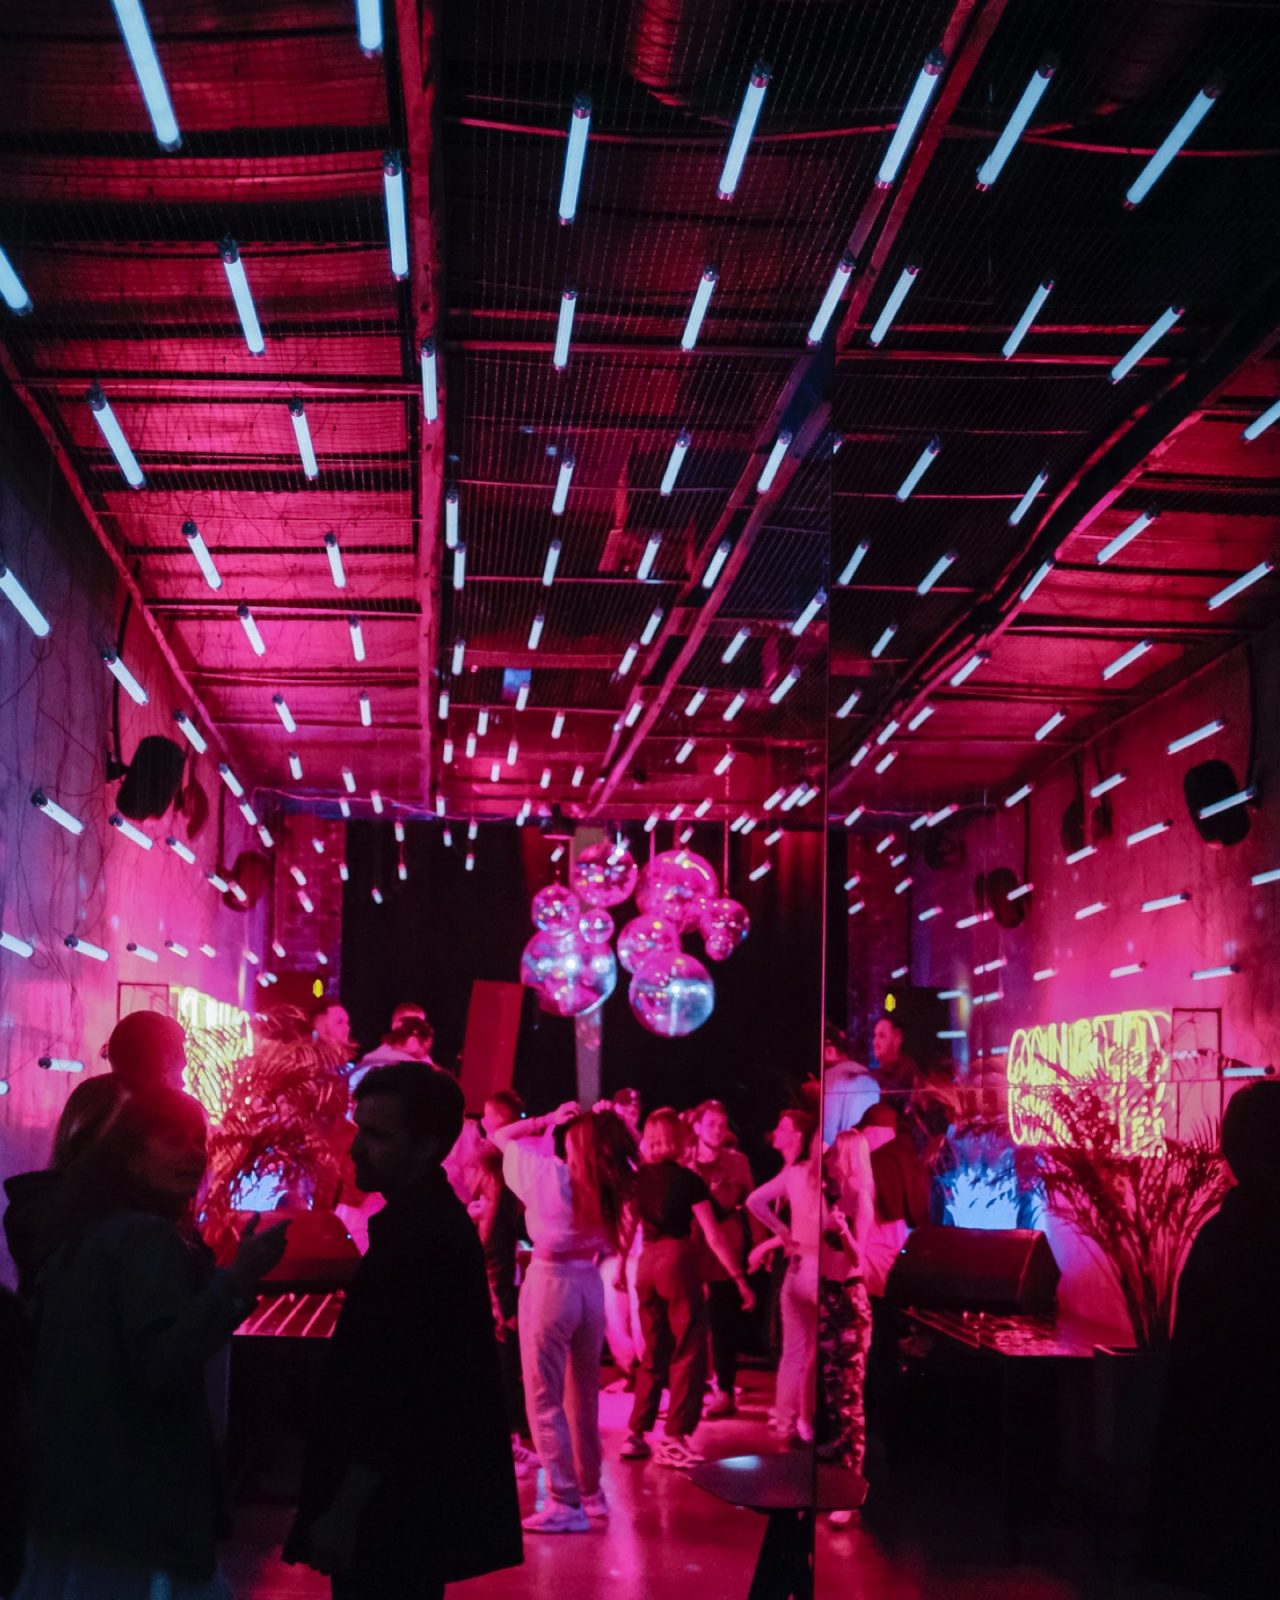 People dancing at a night club with disco balls and pink neon lights